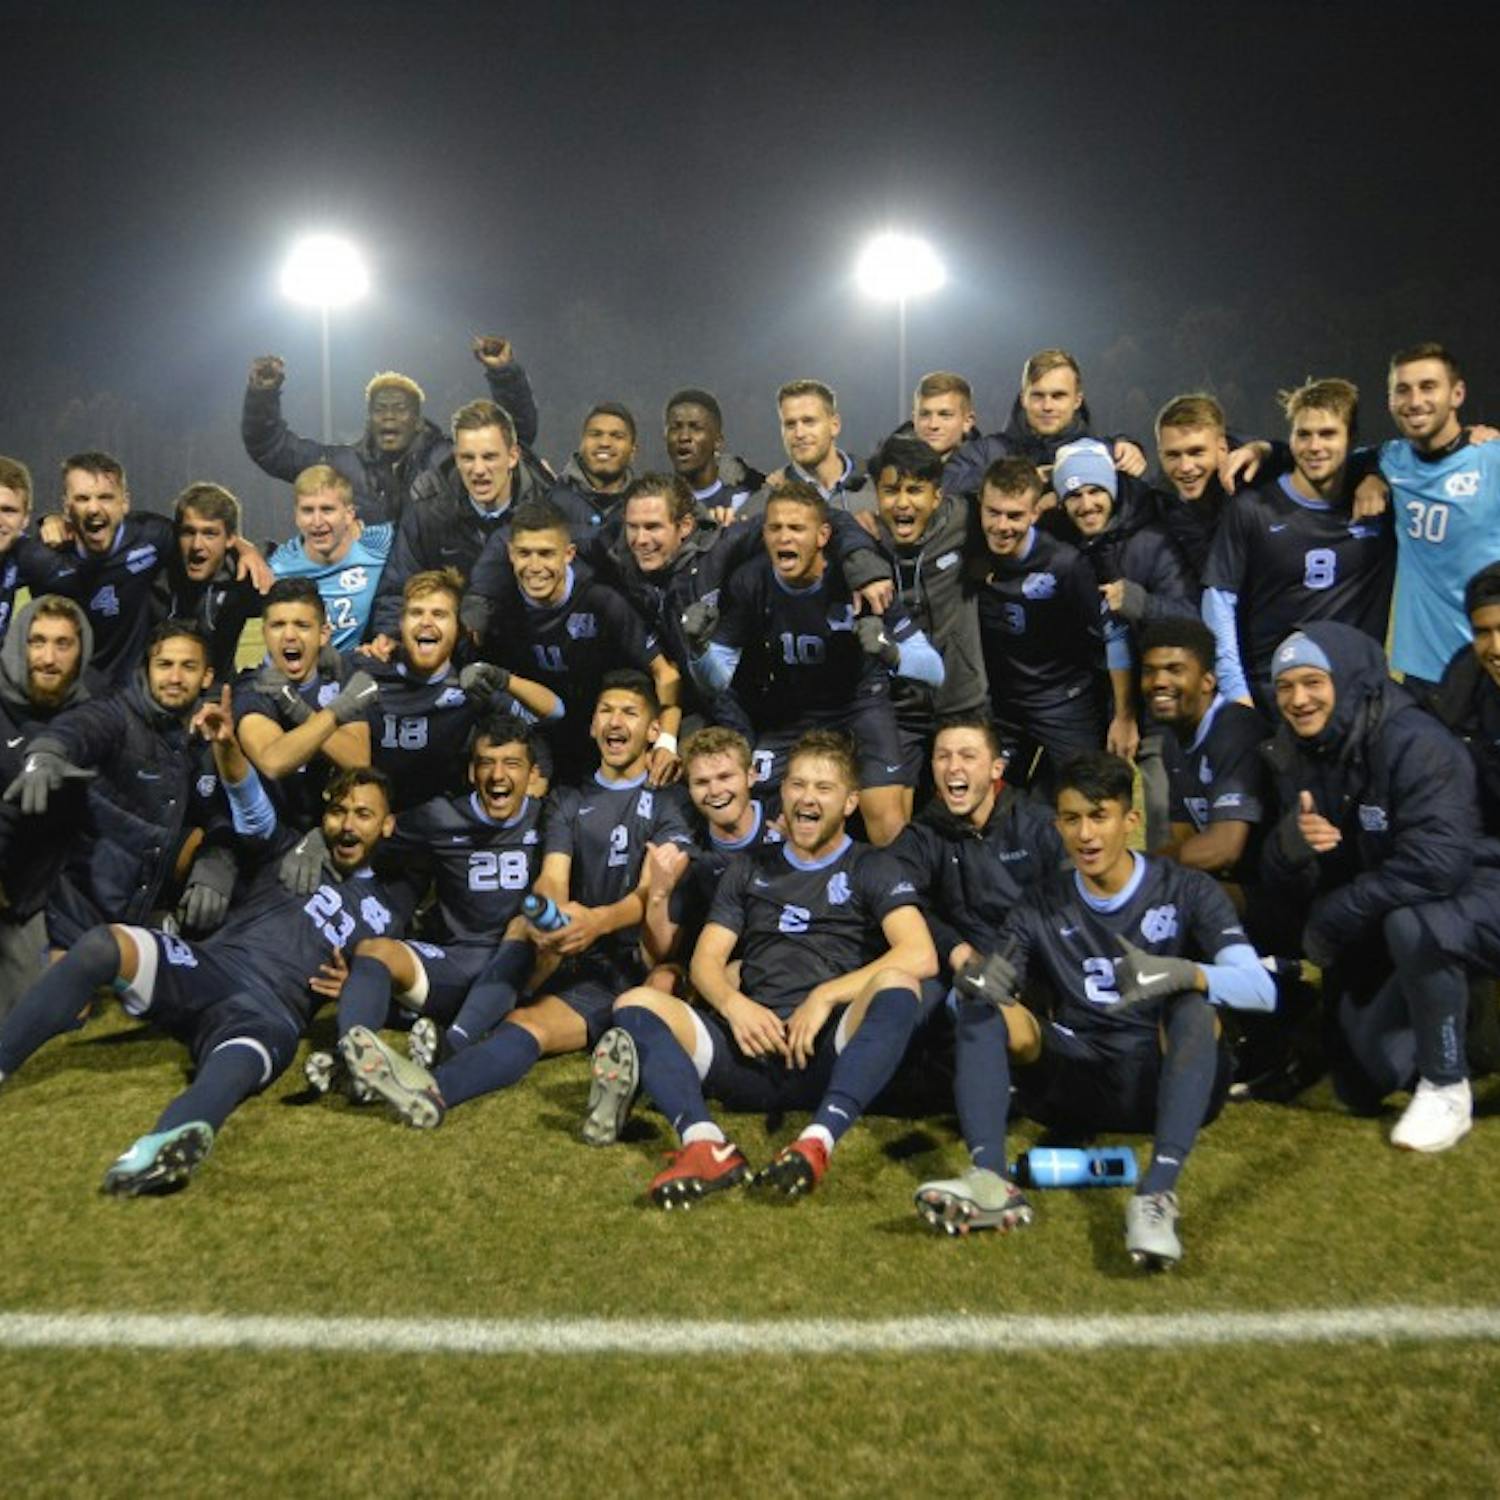 UNC Men's Soccer defeated Fordham University, 2-1 on Saturday night, to advance to the Final Four of the NCAA tournament.